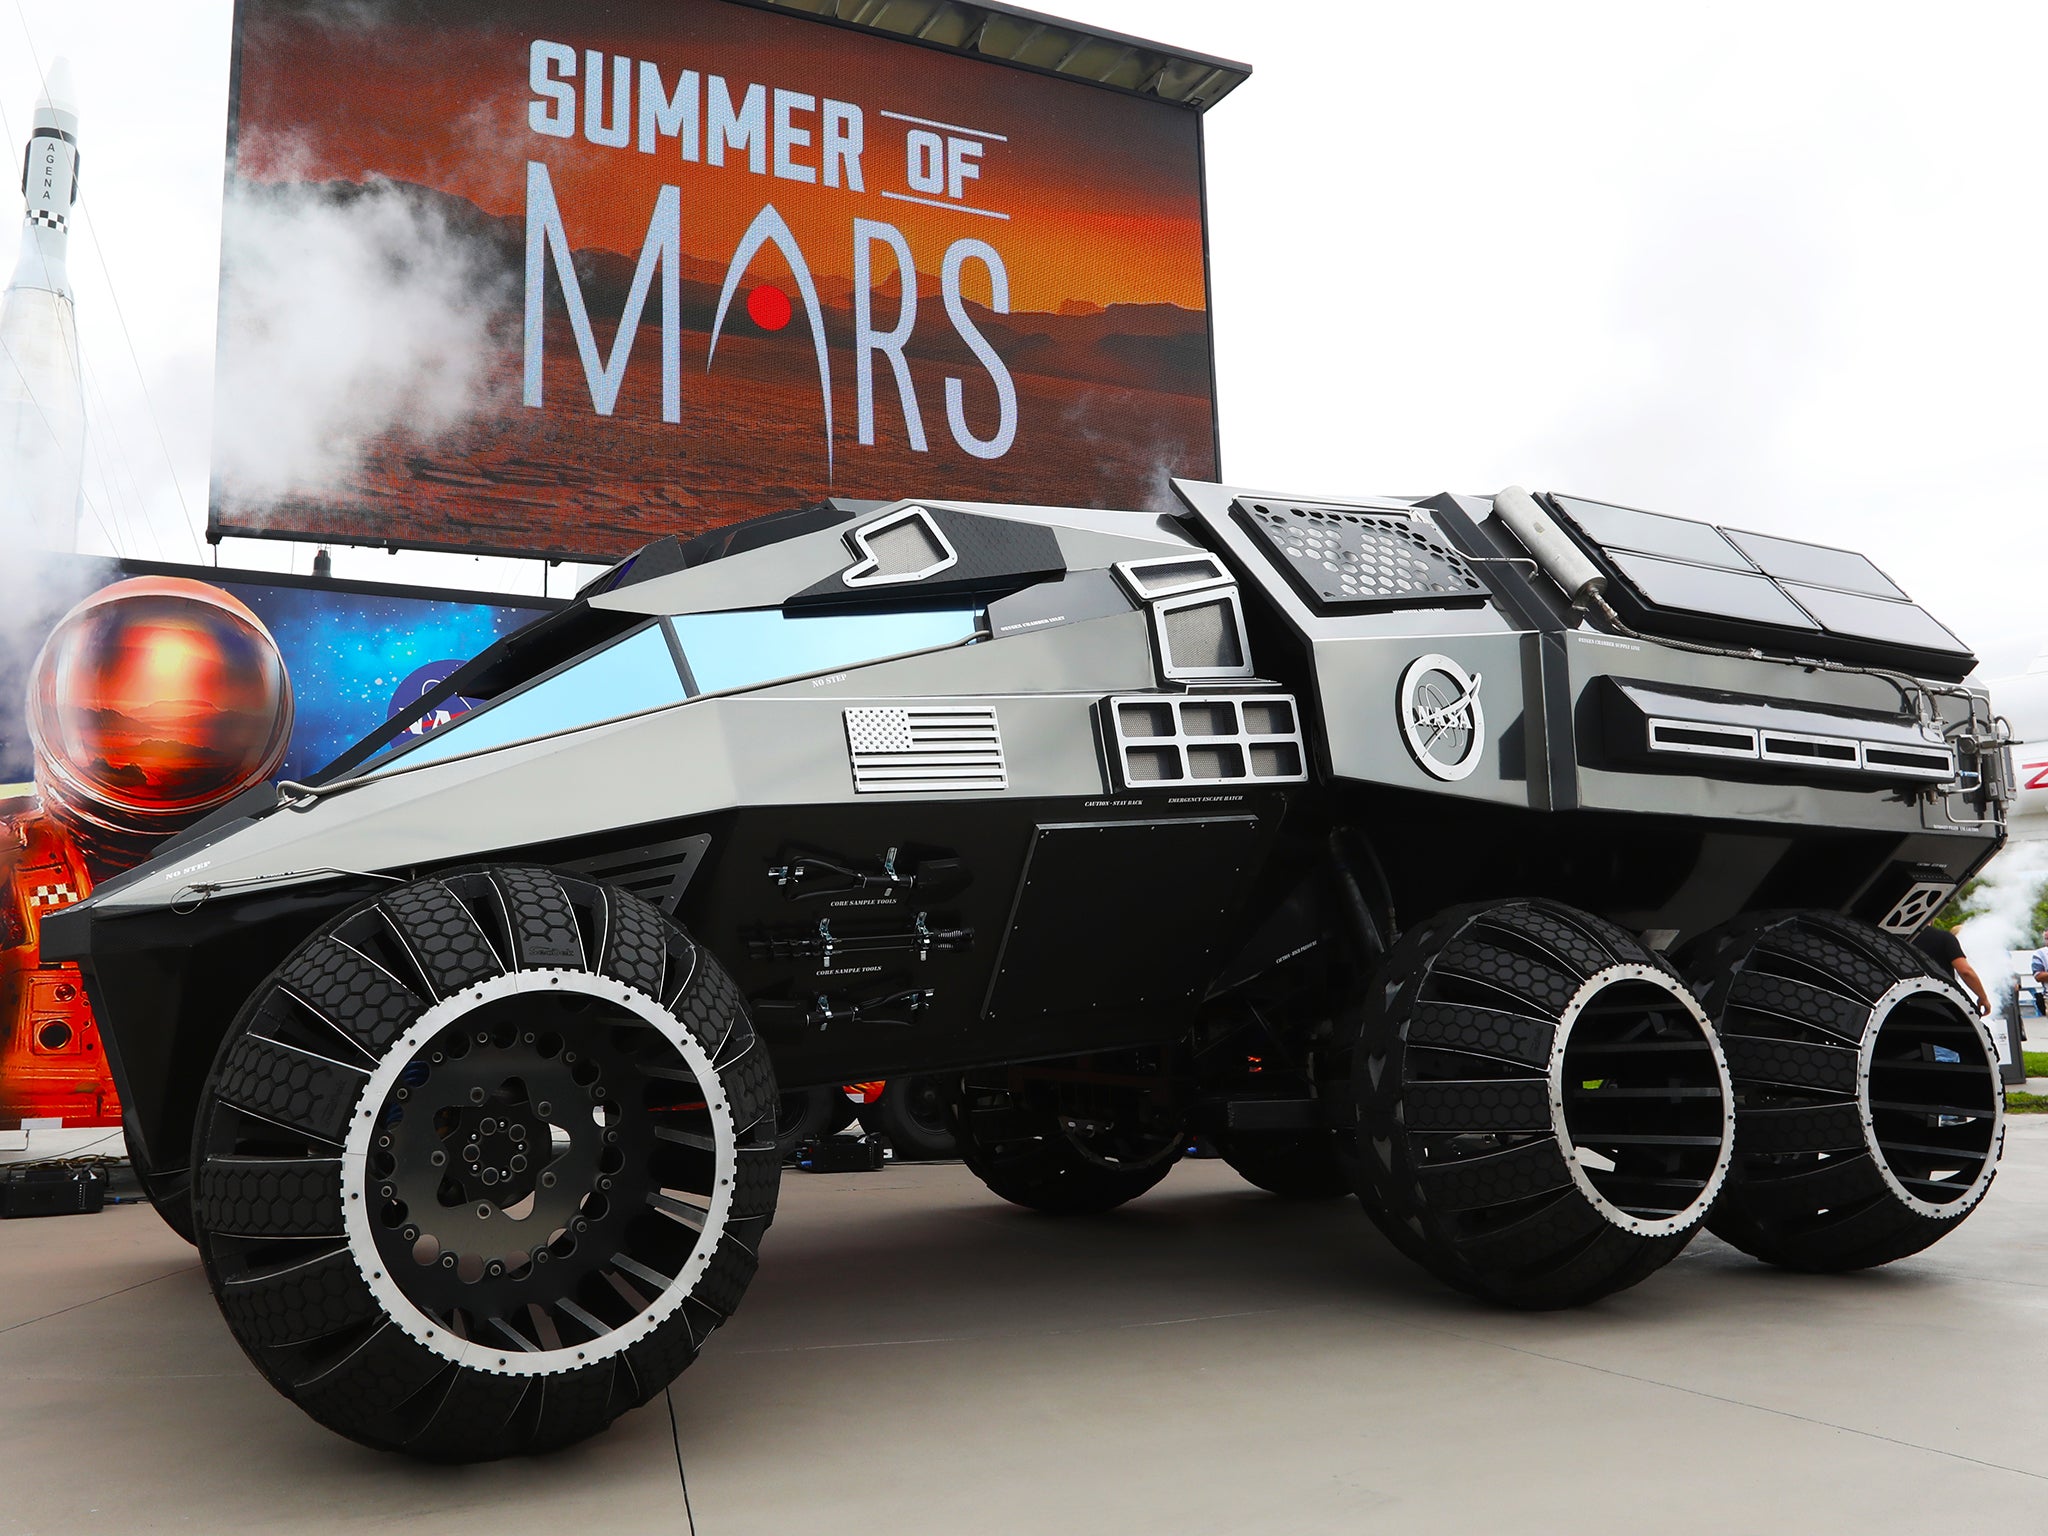 outer space martian vehicle